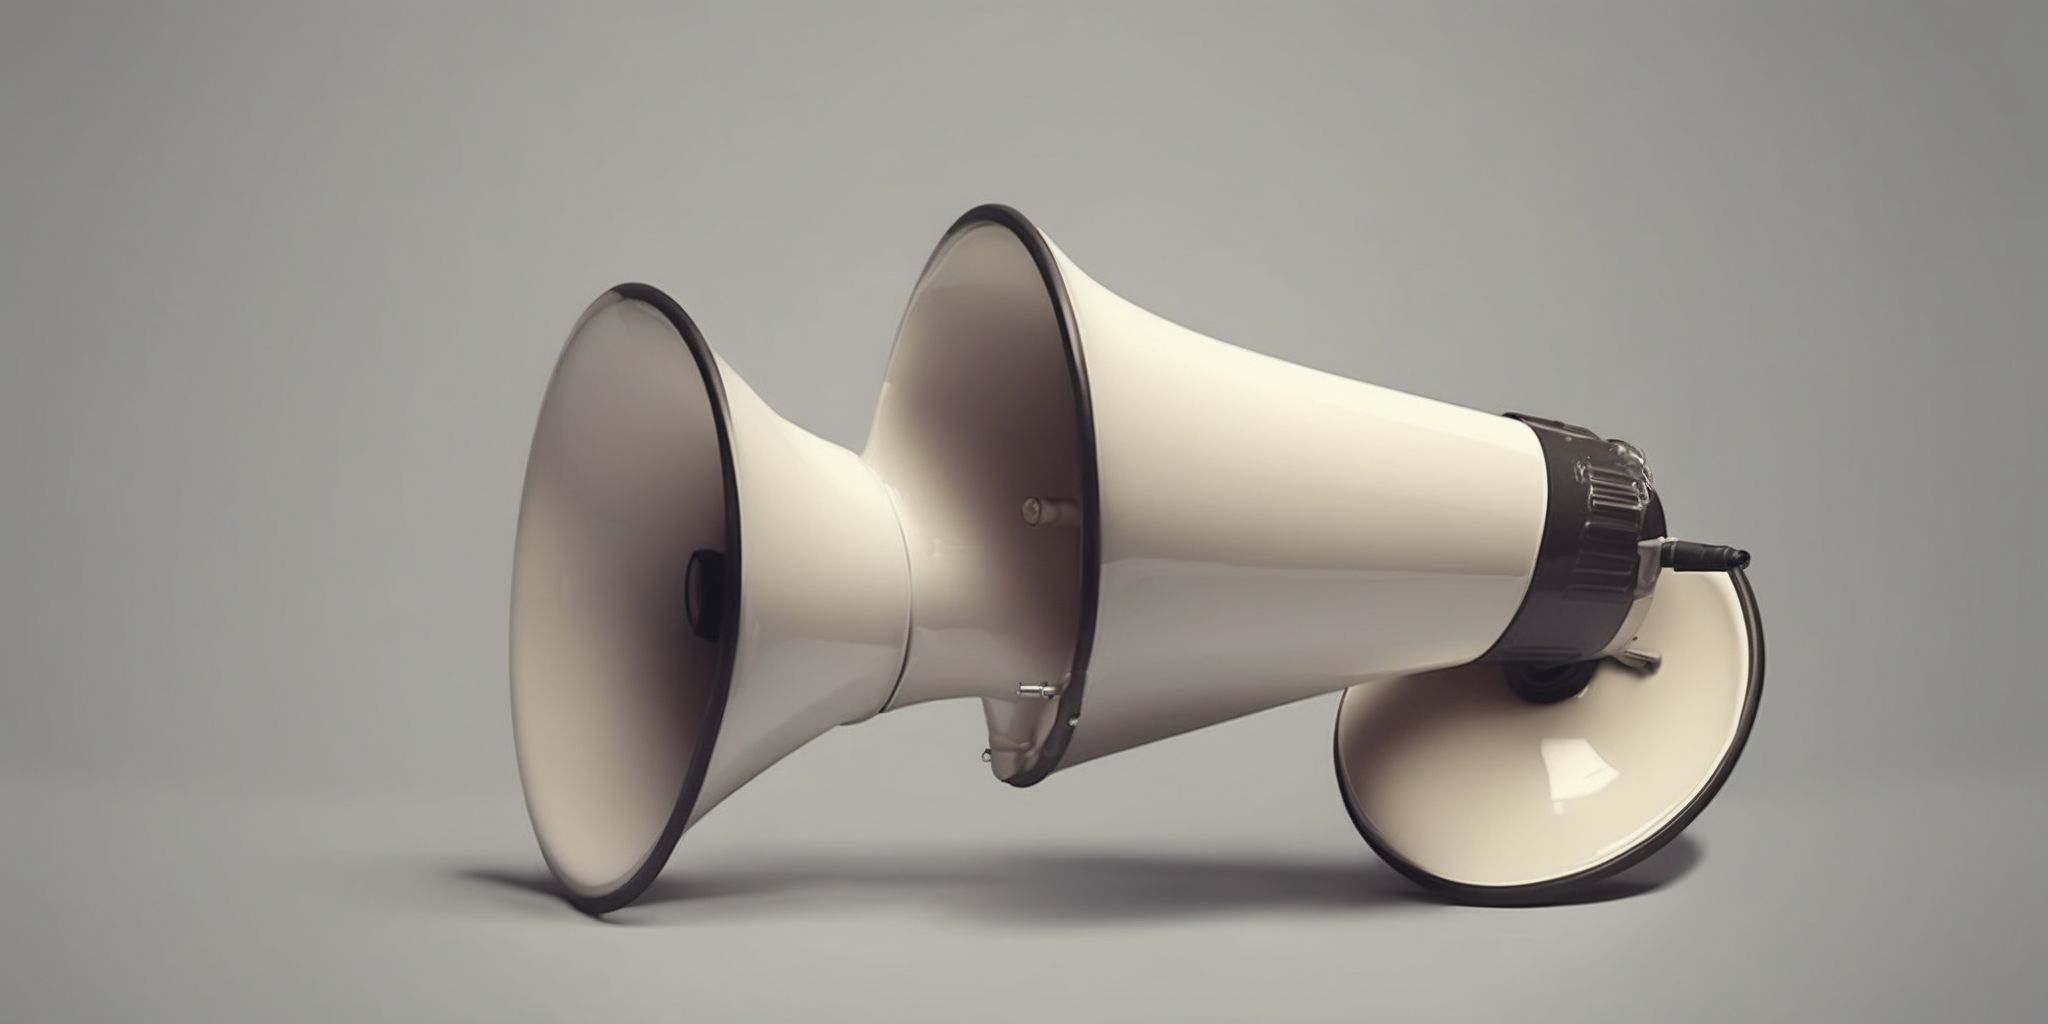 Megaphone  in realistic, photographic style